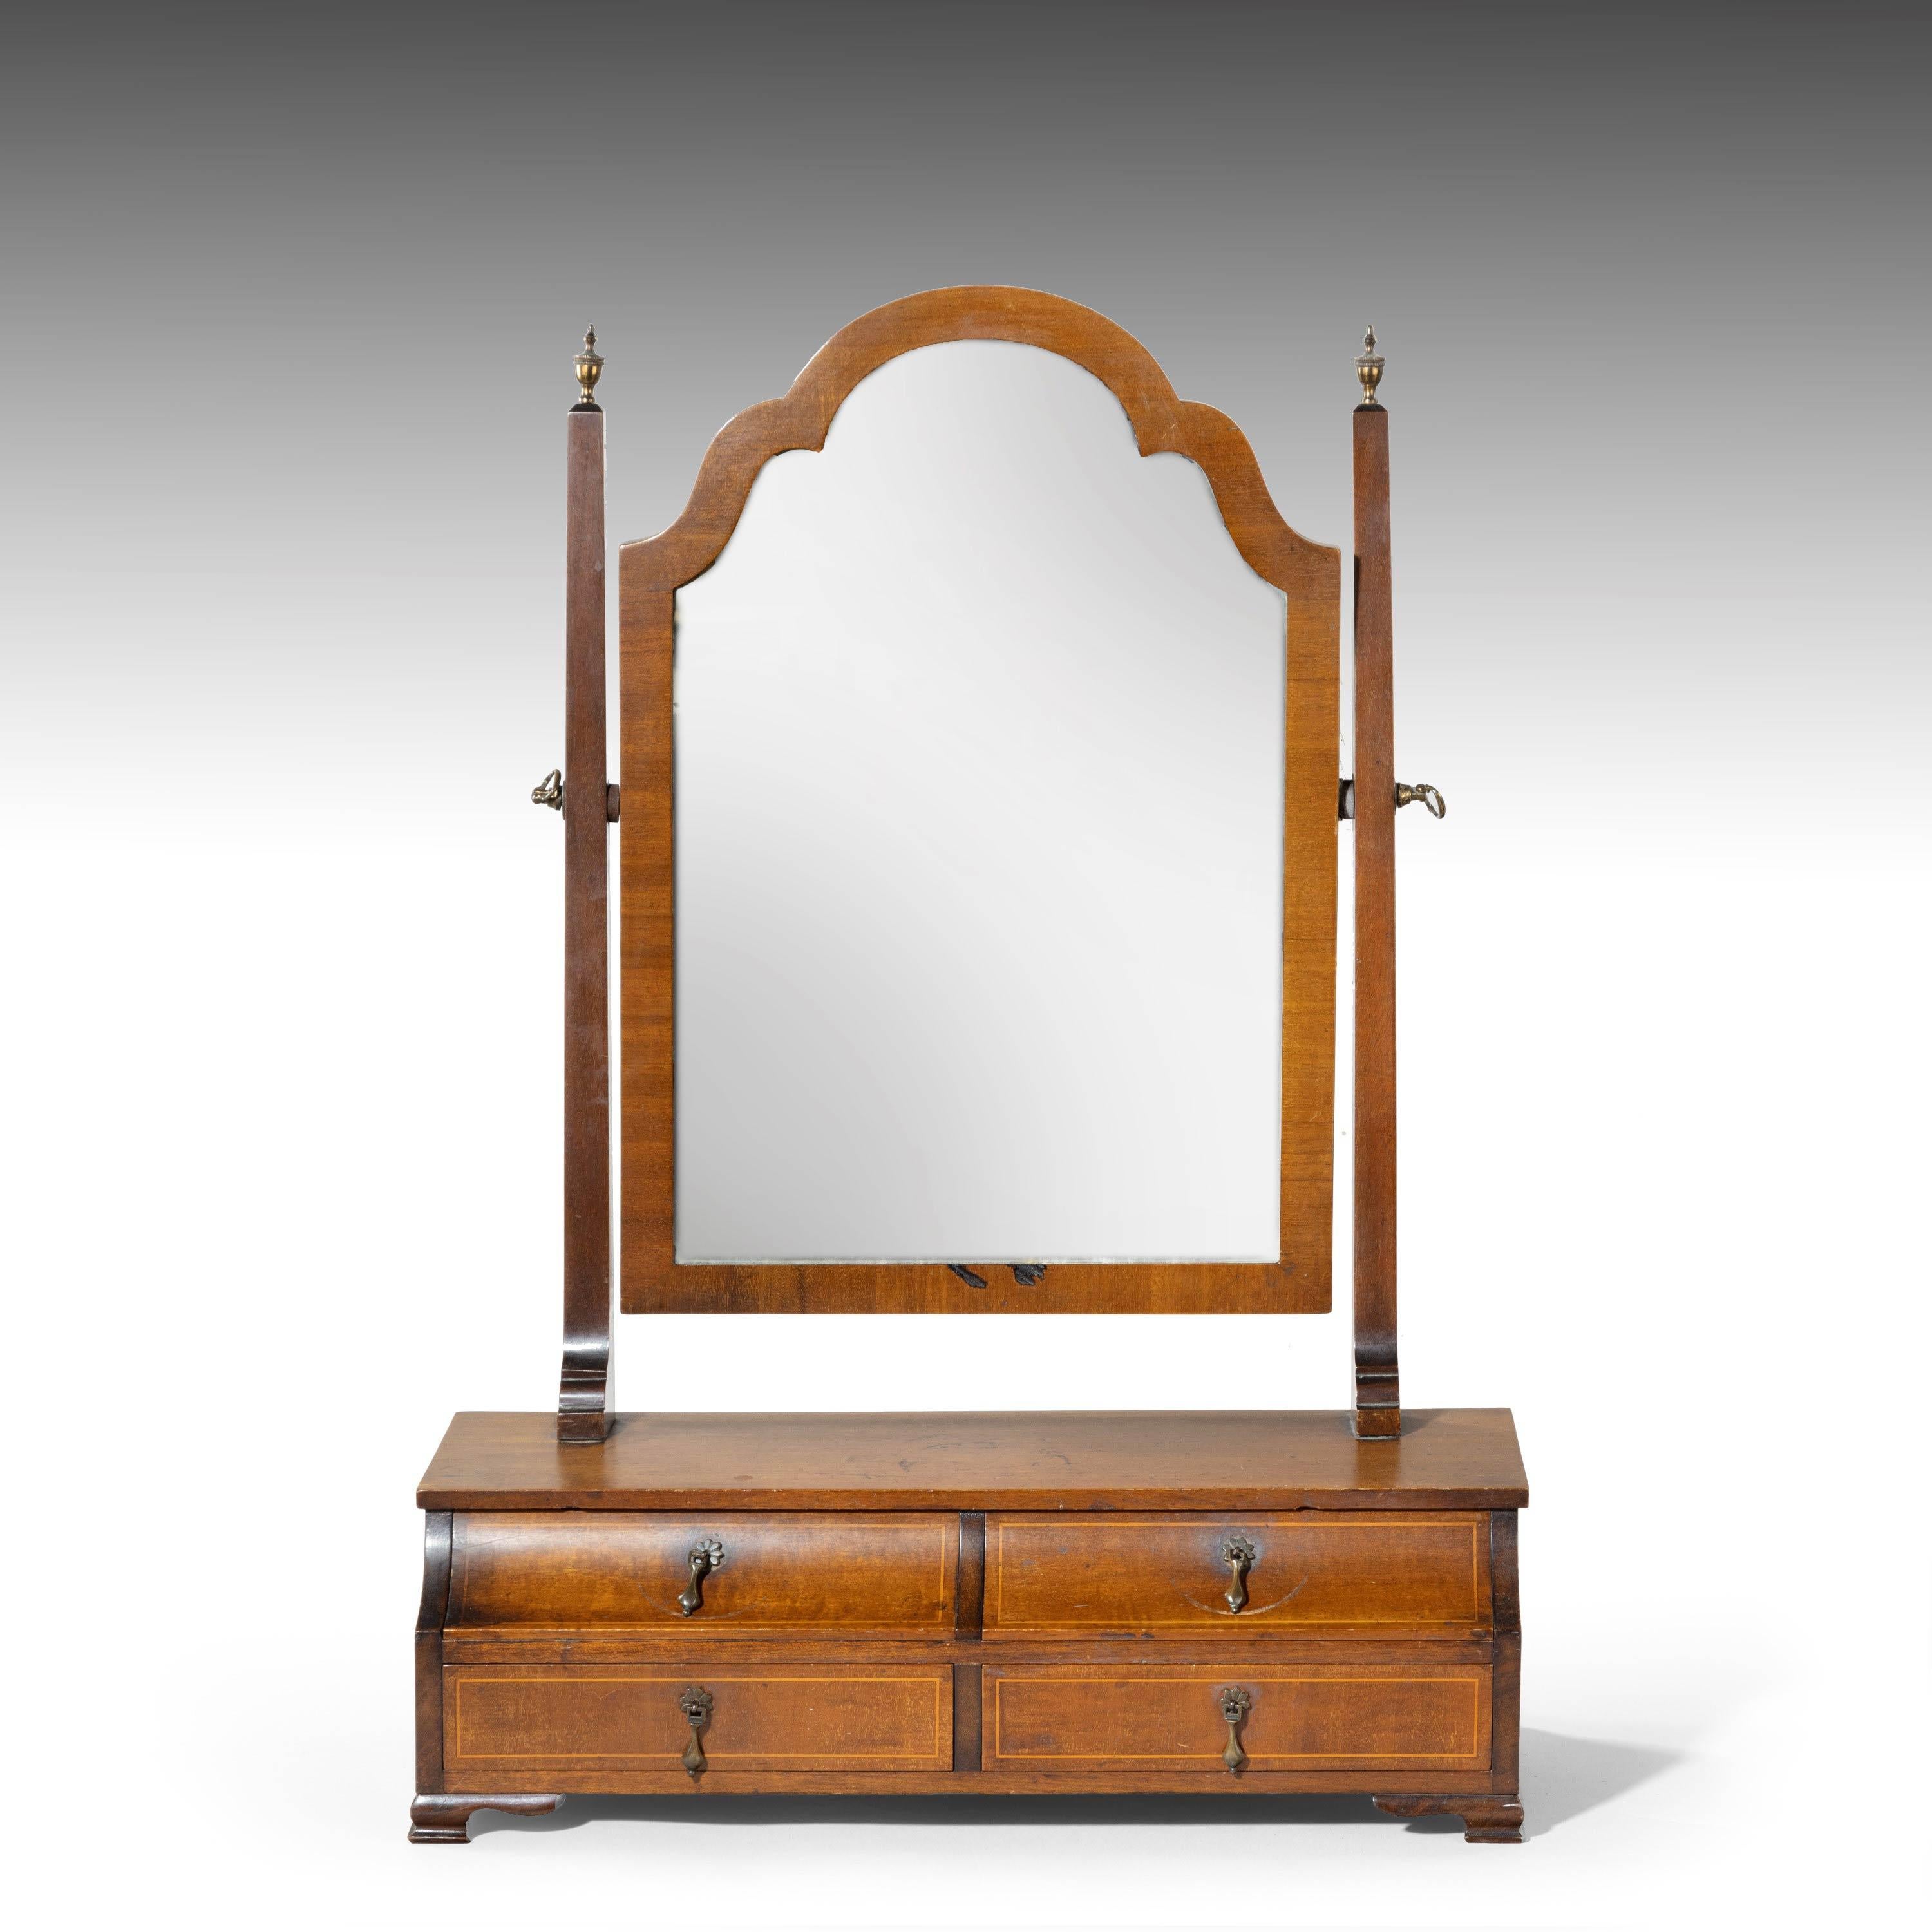 A most unusual mahogany framed mirror of Queen Anne design. A shaped top over a bank of four drawers. The top drawers with cavetto molded fronts. Very fine quality oak lined drawers. Original pendant and rather unusual brass drop handles.
 